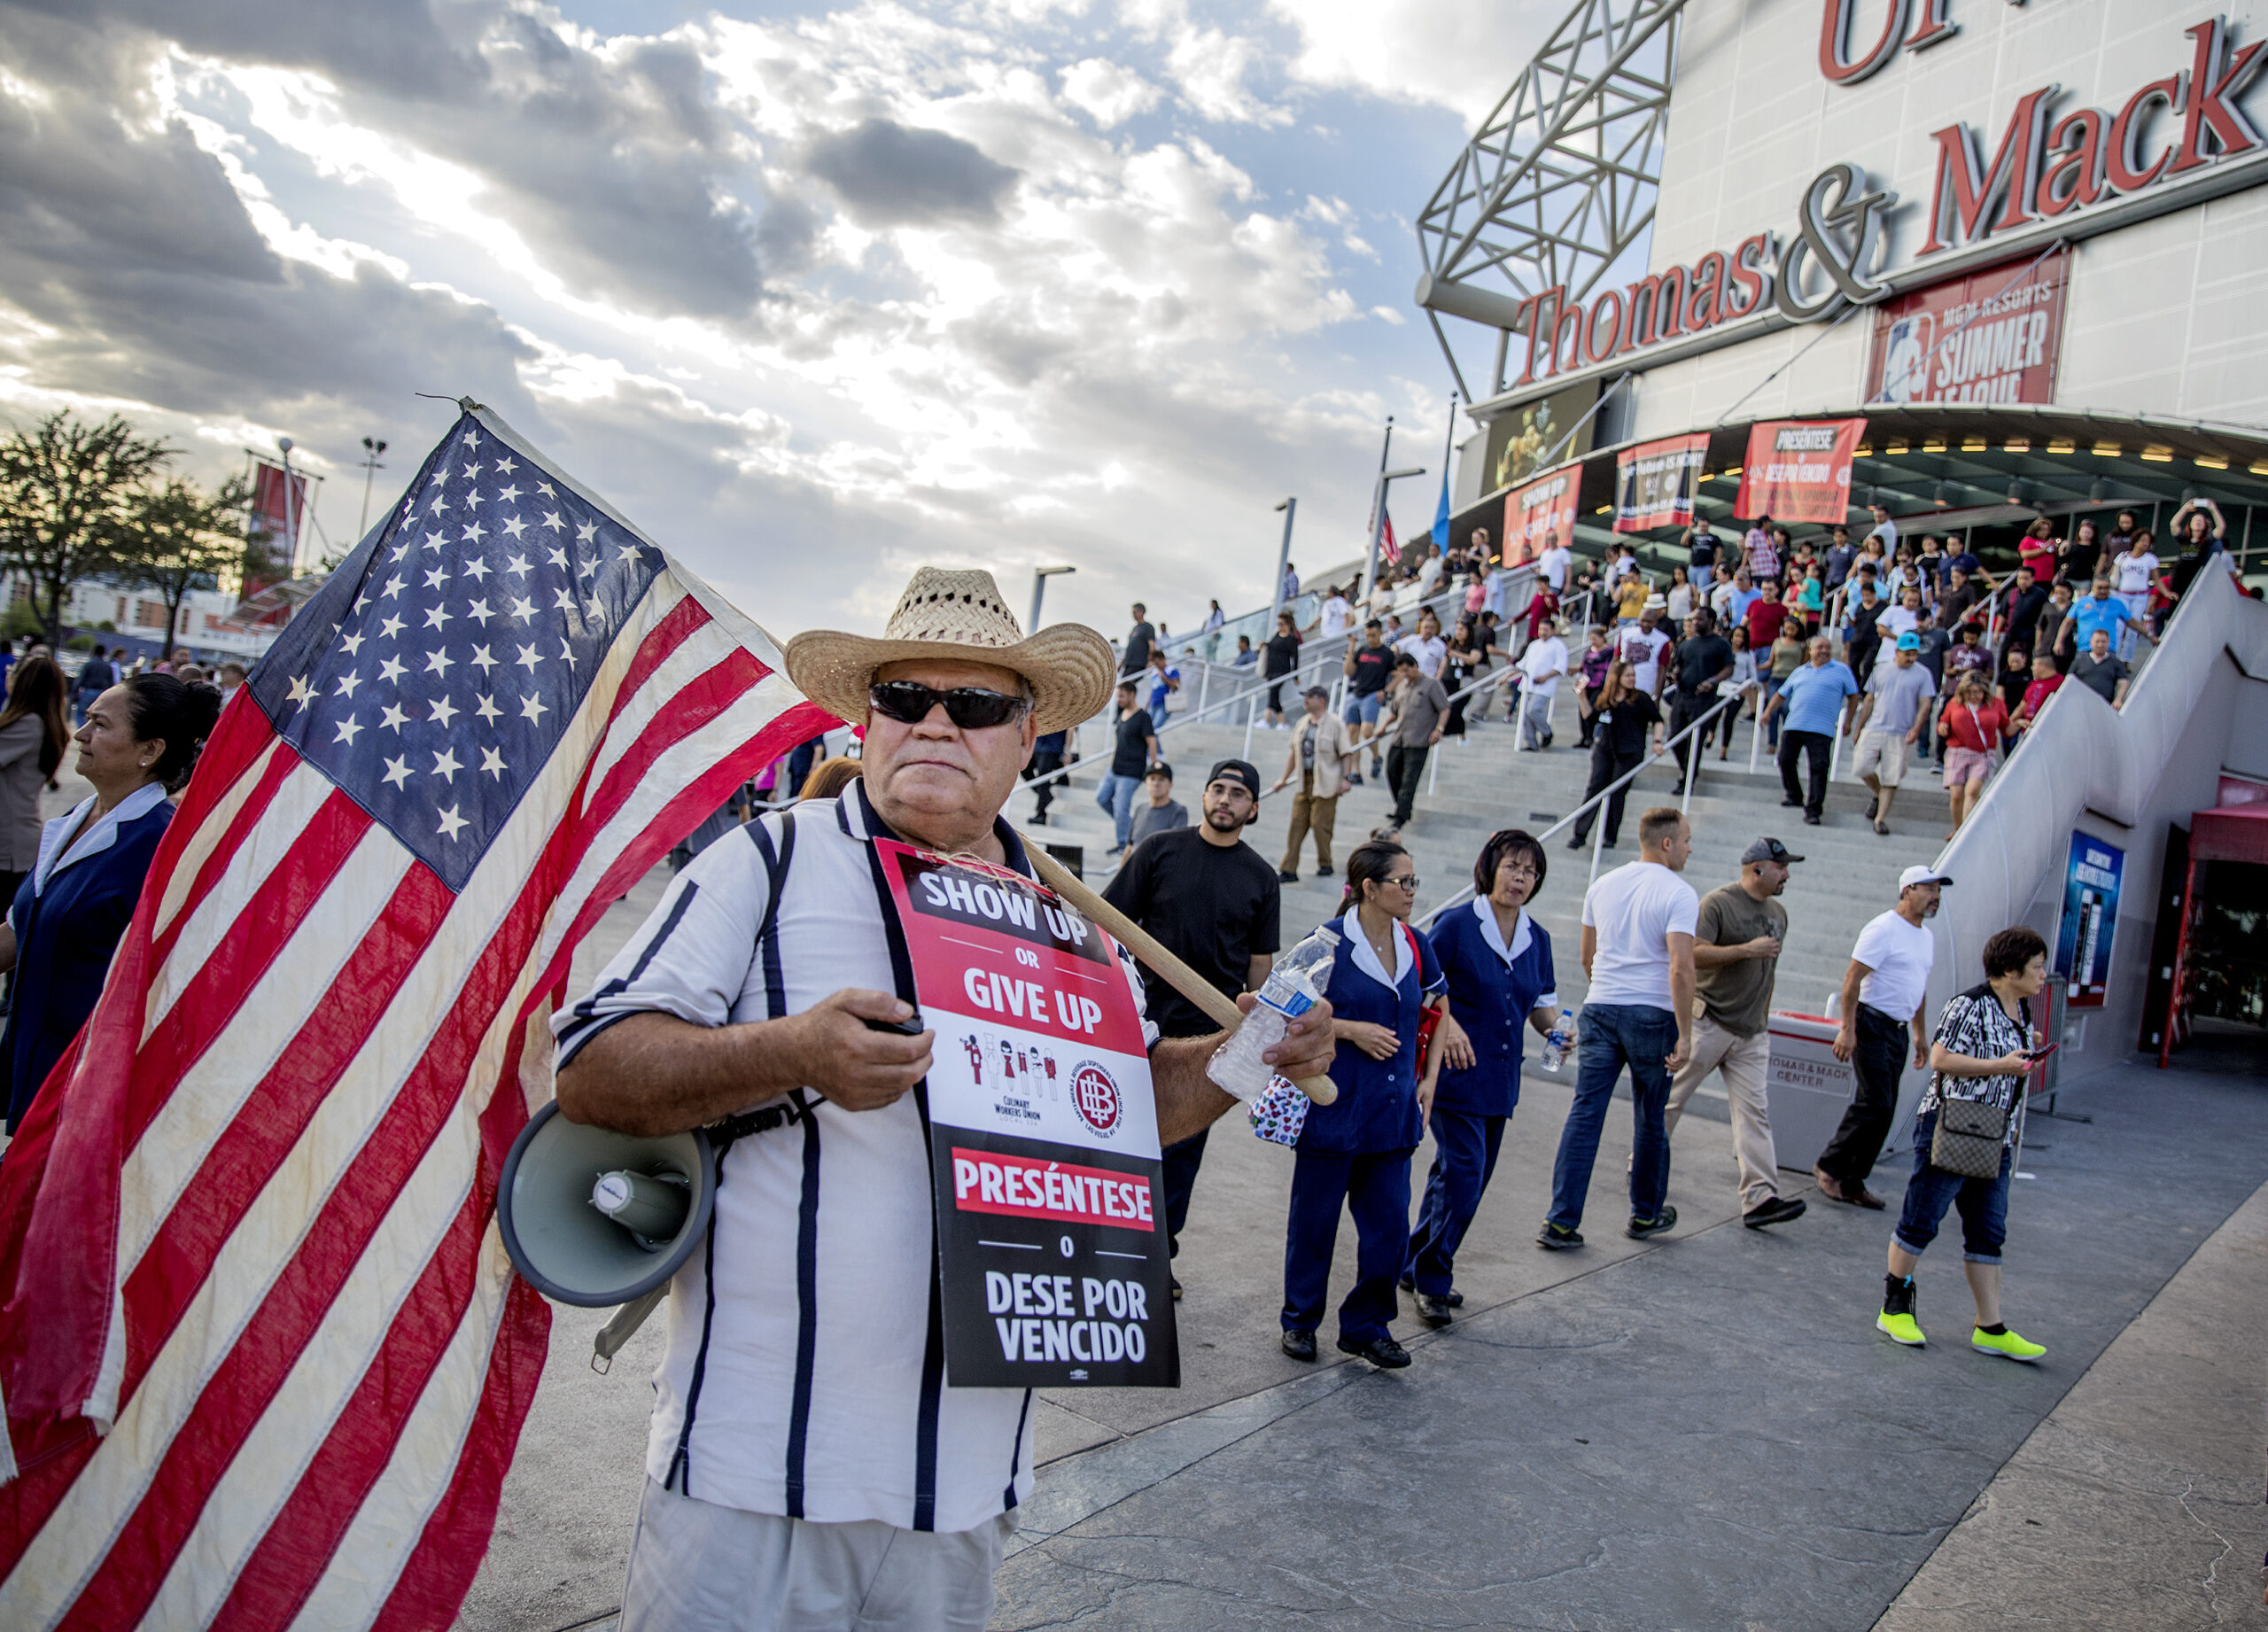 Union member stands holding flag